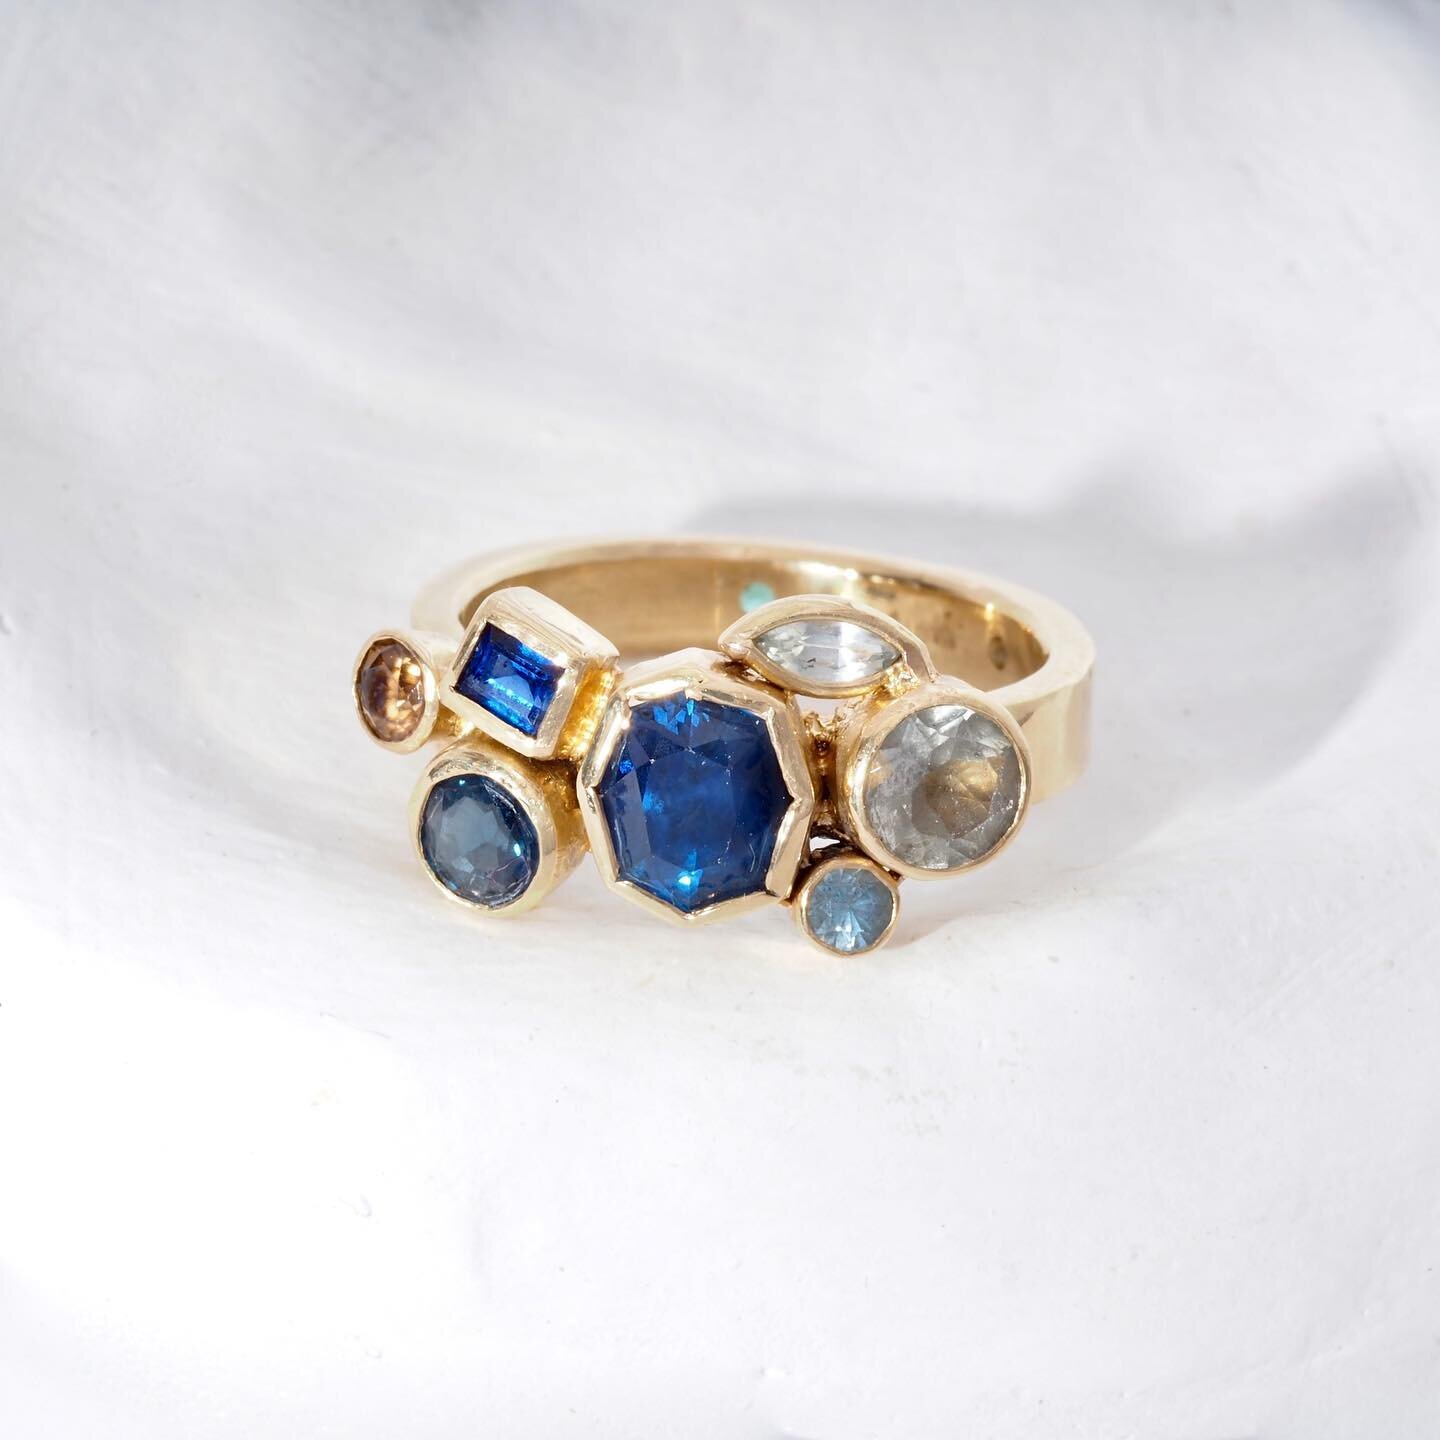 Gorgeous gemstones brighten this gray May day. #recycled #ethical #rings #madewithlove #supportlocal #artoftheday